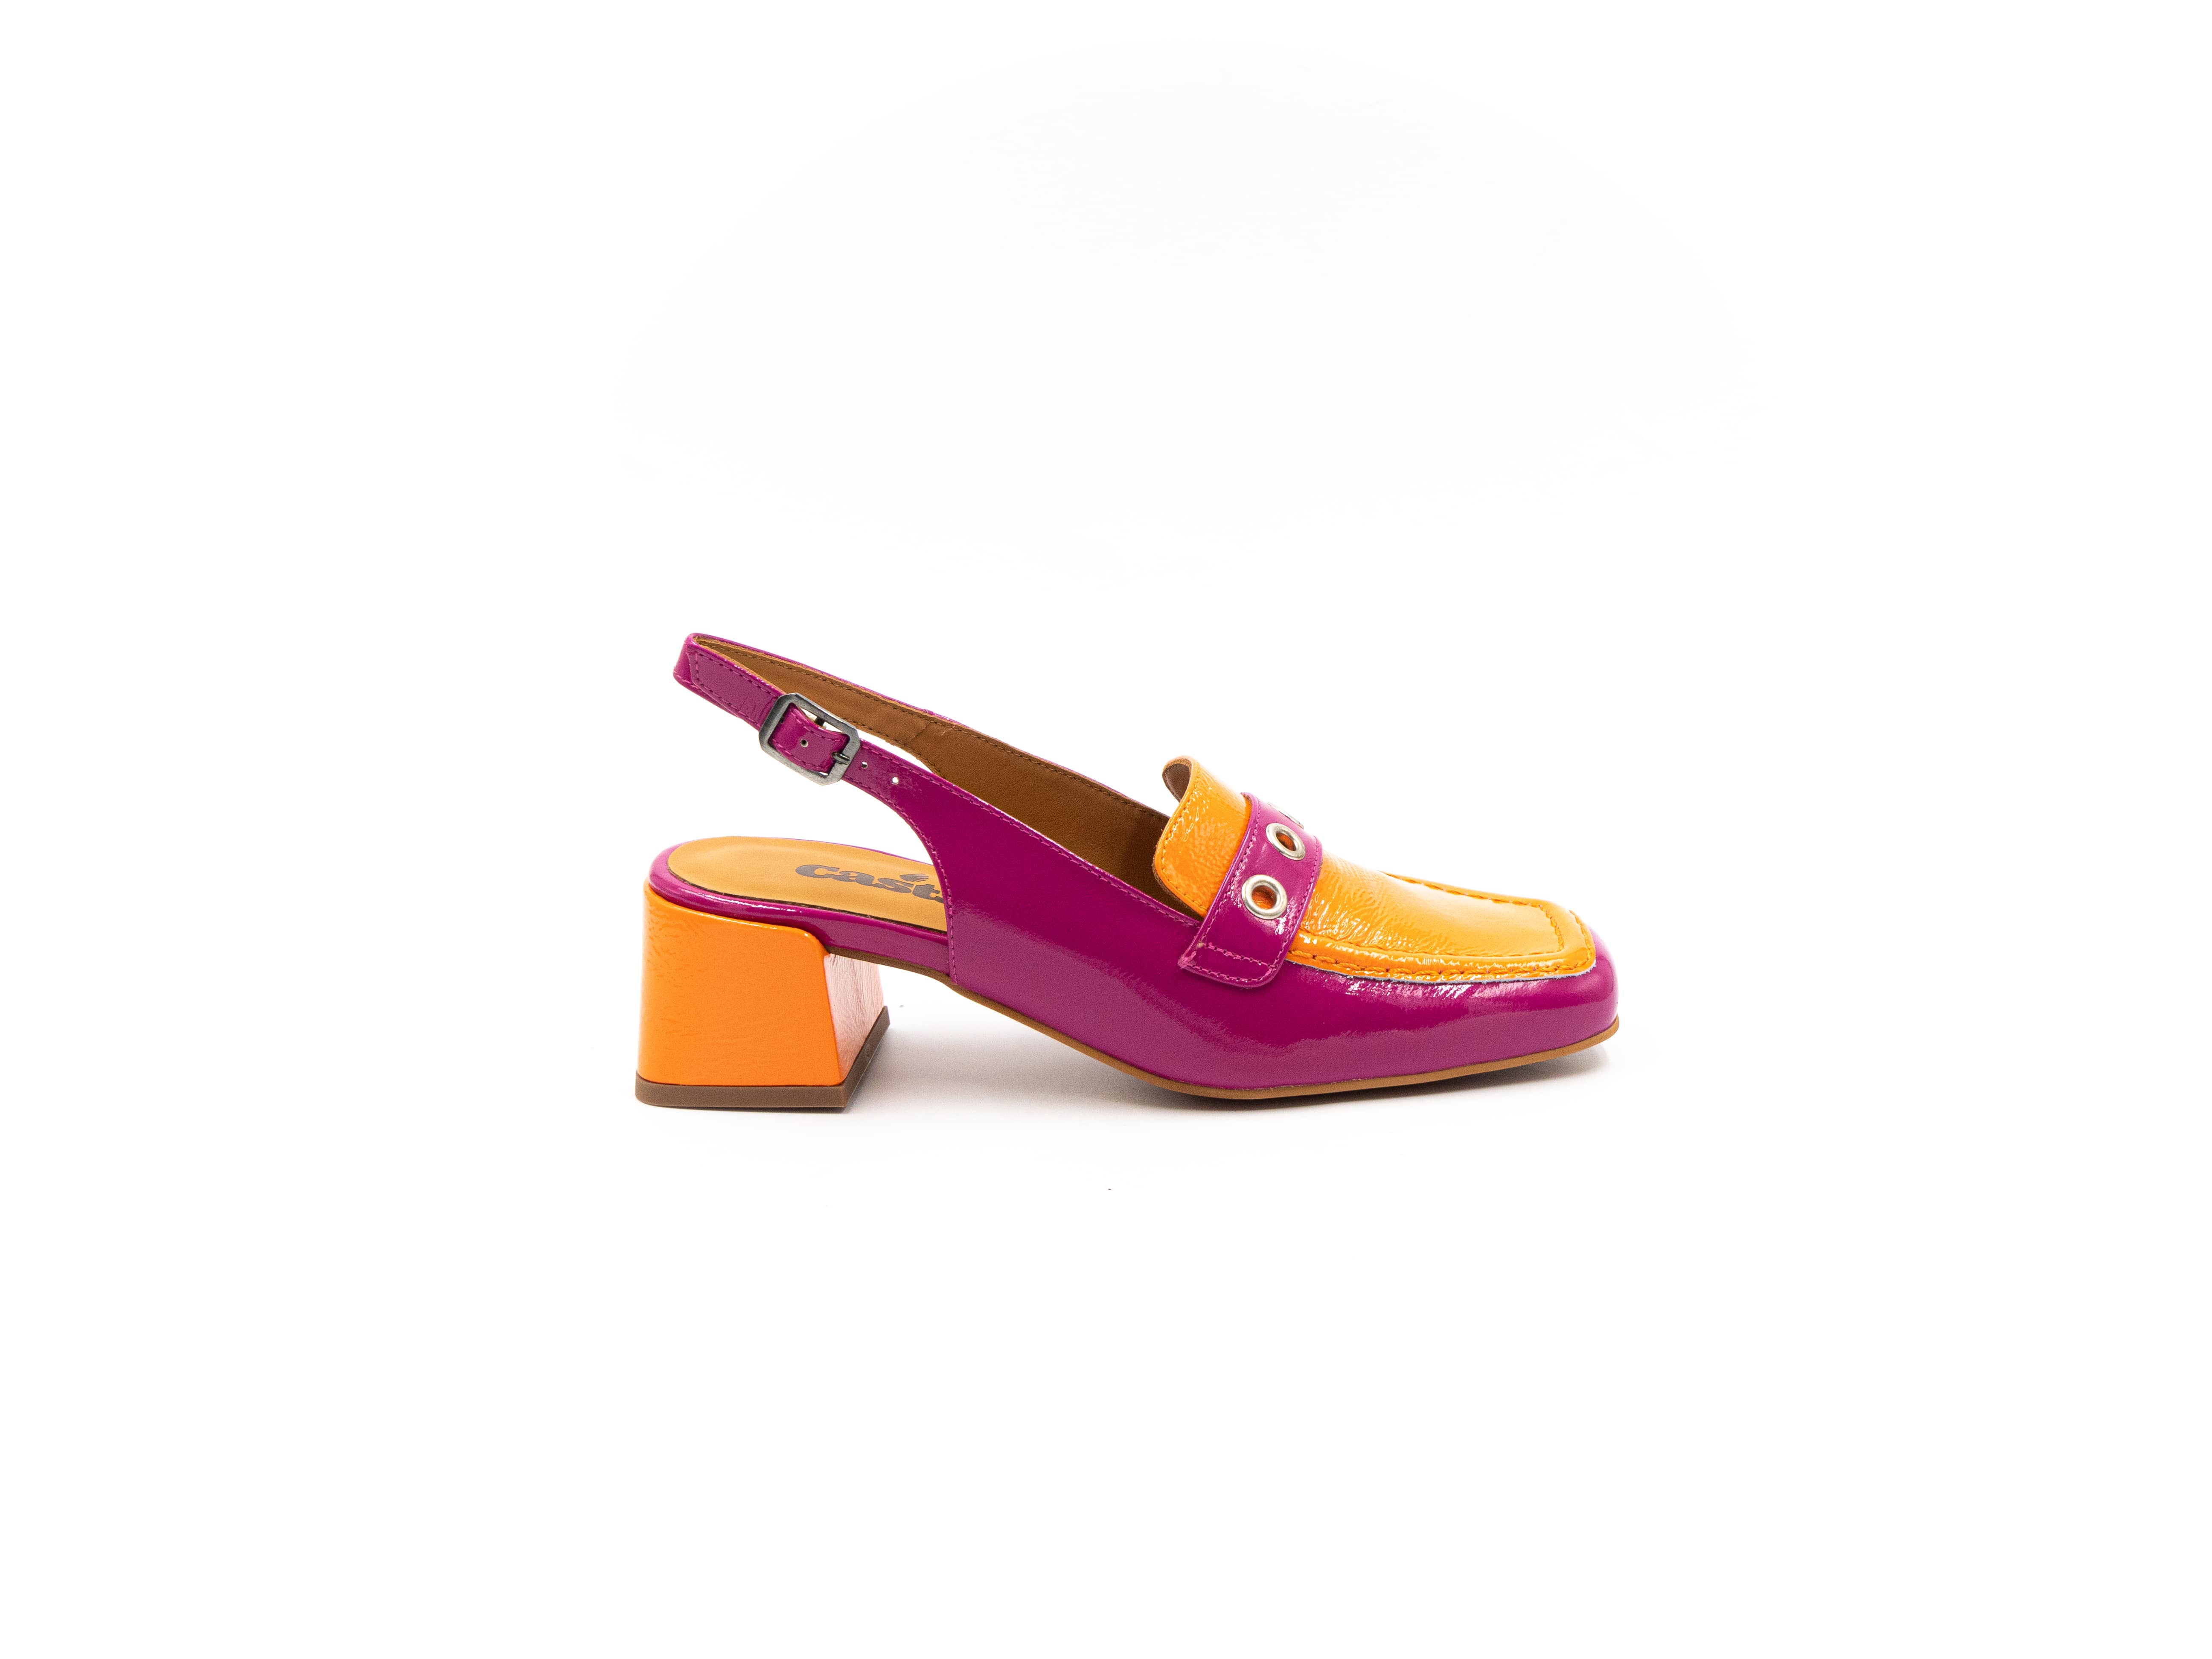 Summer loafers in shades of orange and pink.